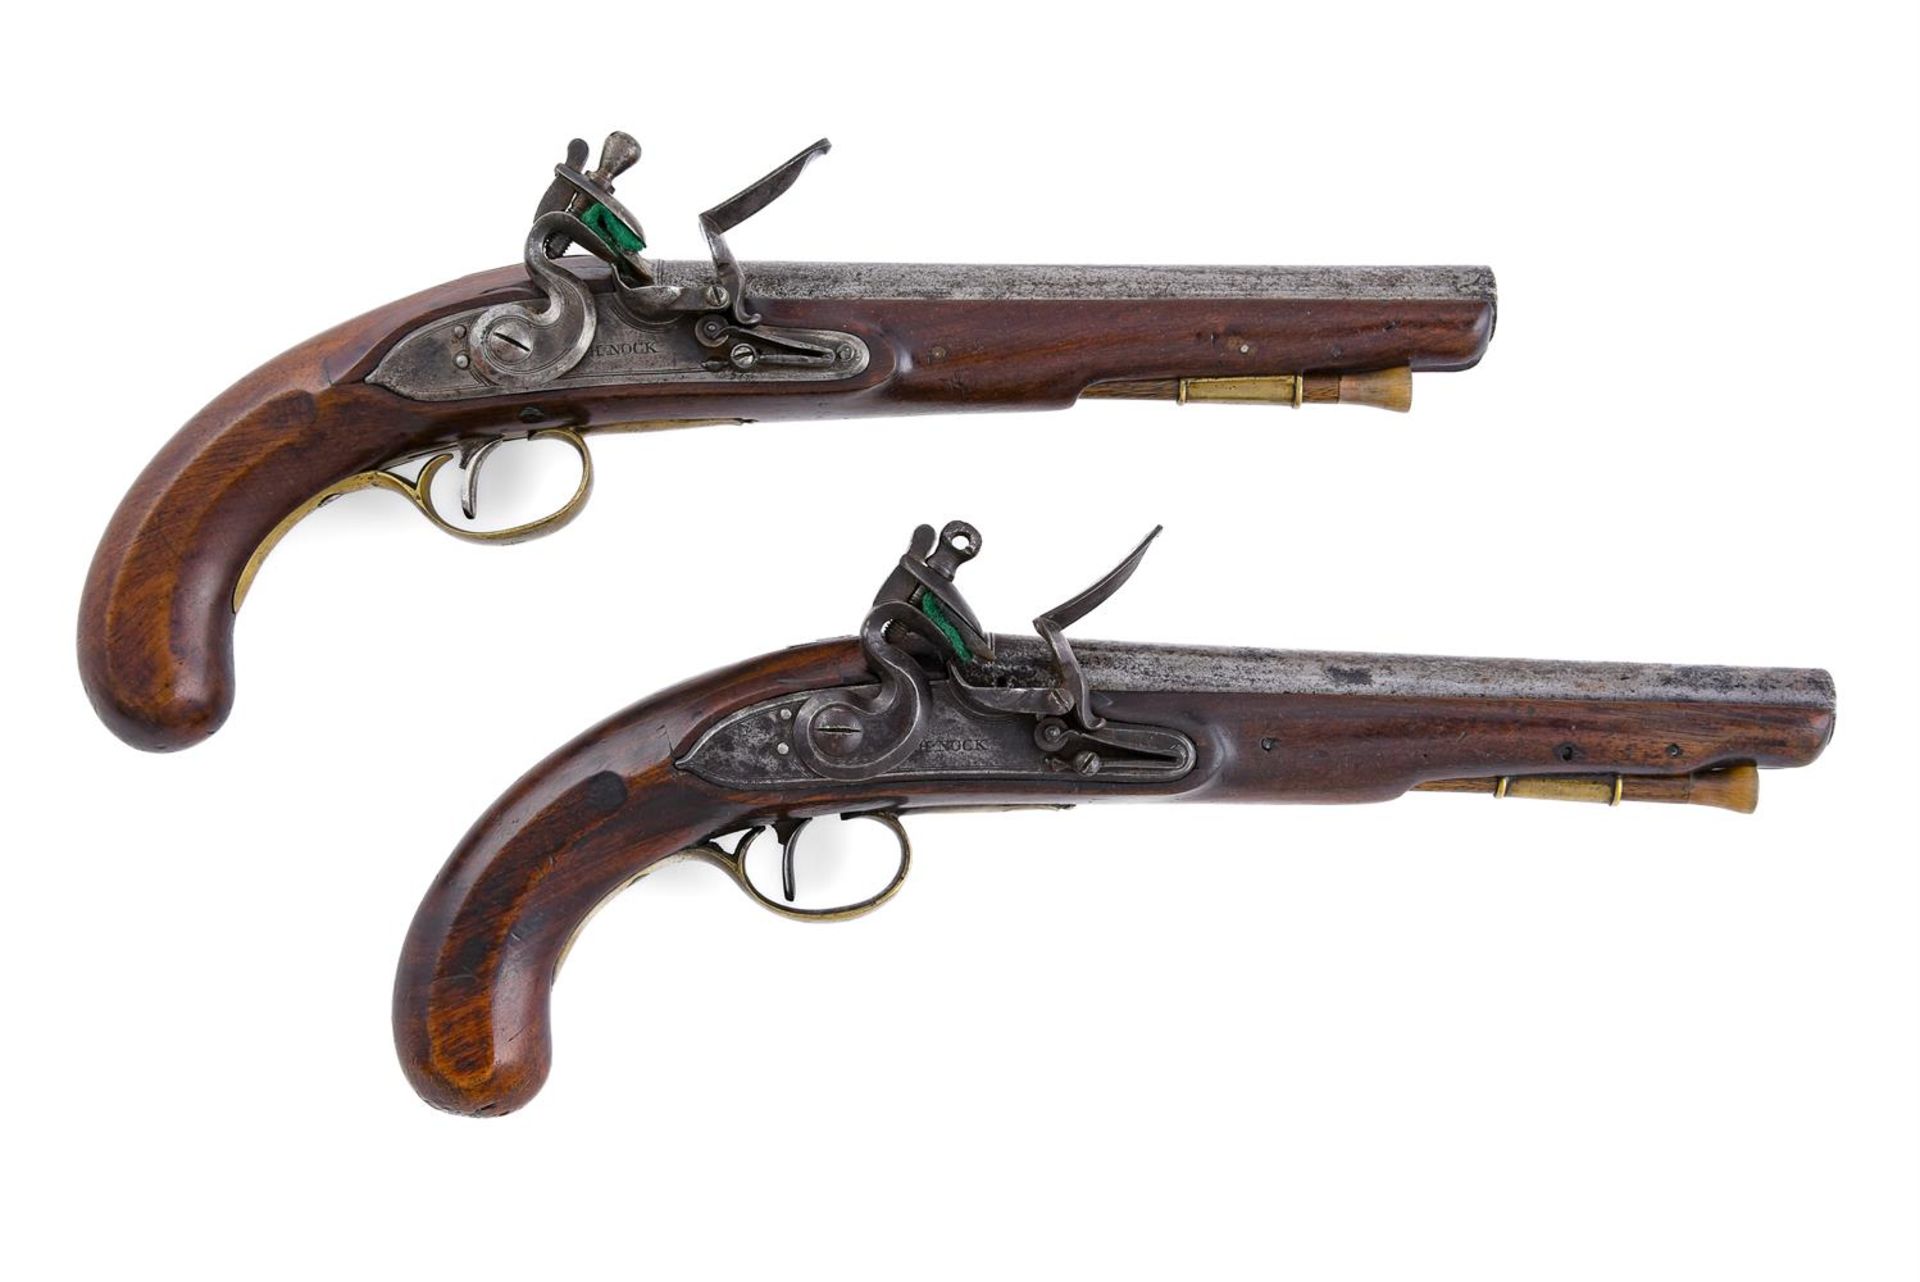 A PAIR OF OFFICER'S PISTOLS BY HENRY NOCK OF LONDON (1741-1804)